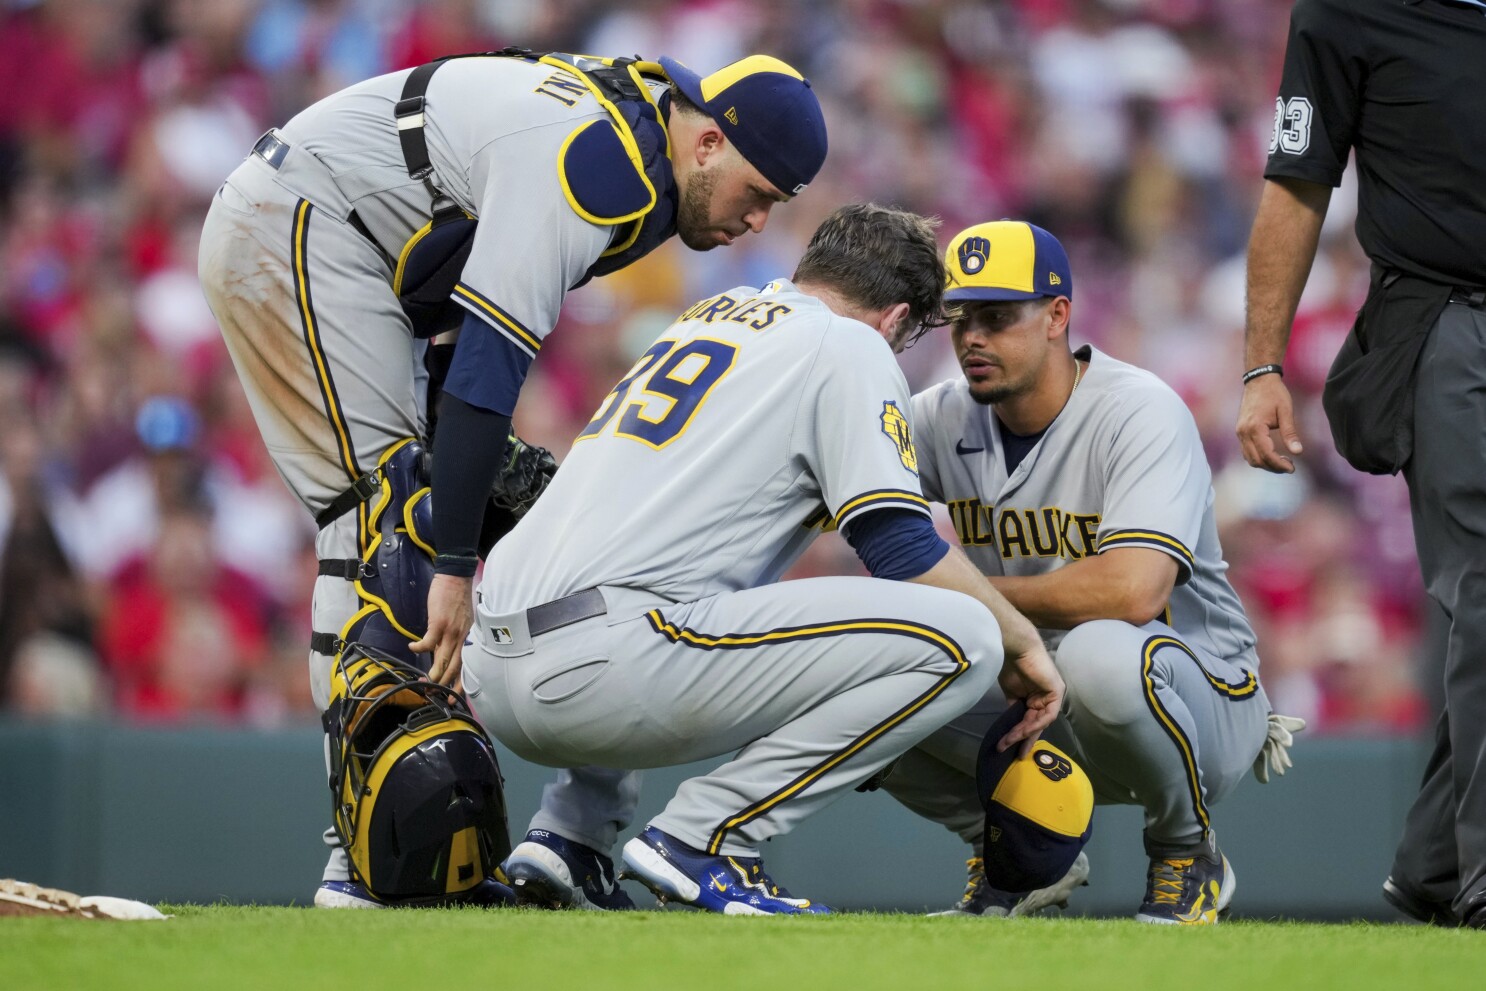 Corbin Burnes was easy choice for Brewers to start Game 1 of the NLDS